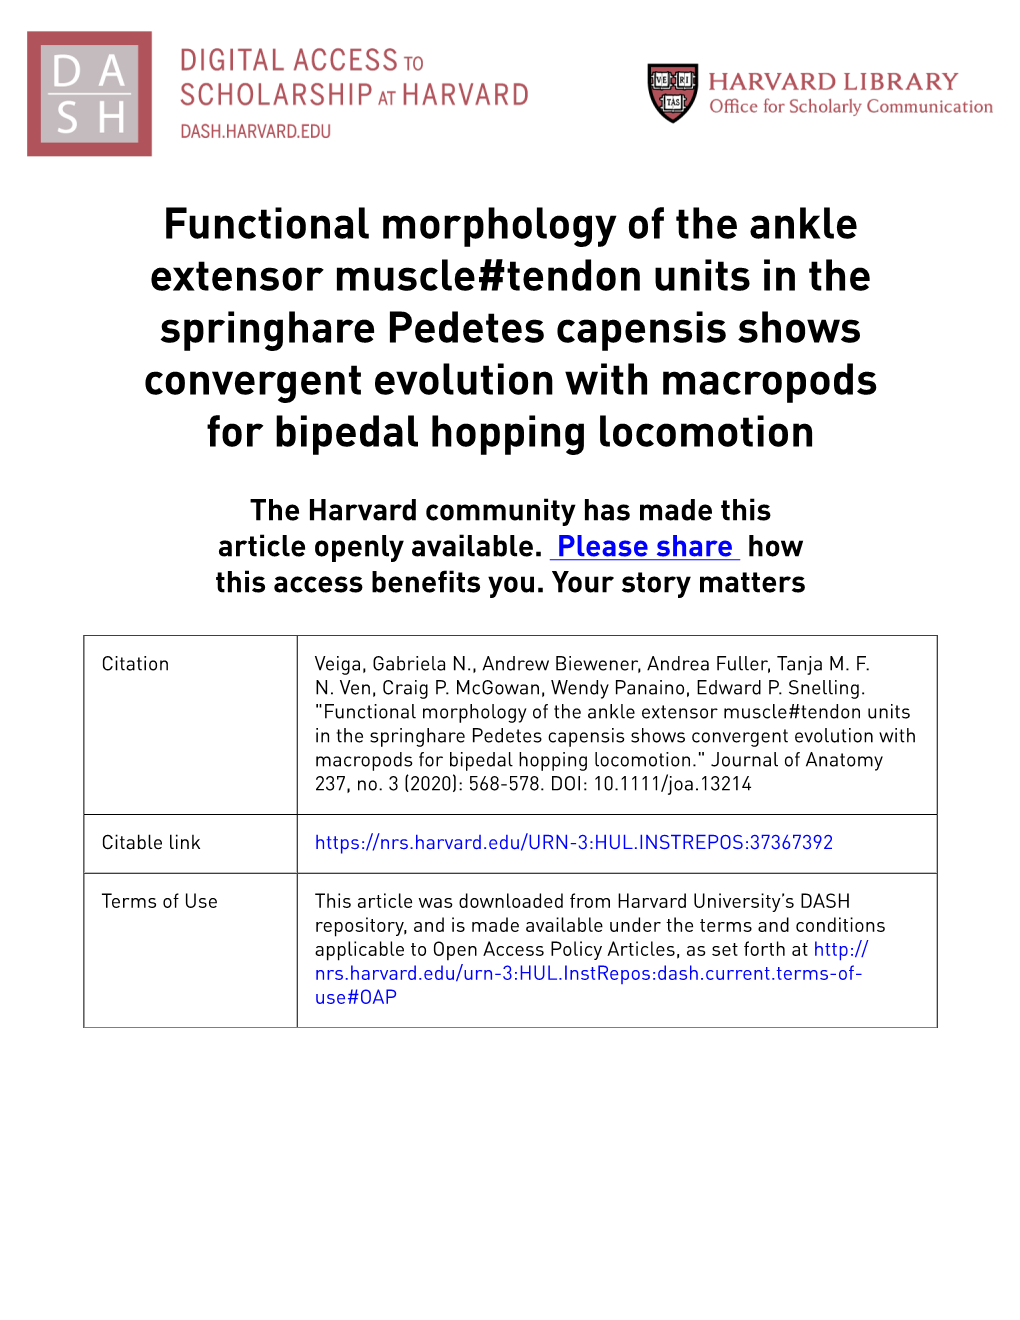 Functional Morphology of the Ankle Extensor Muscle#Tendon Units In